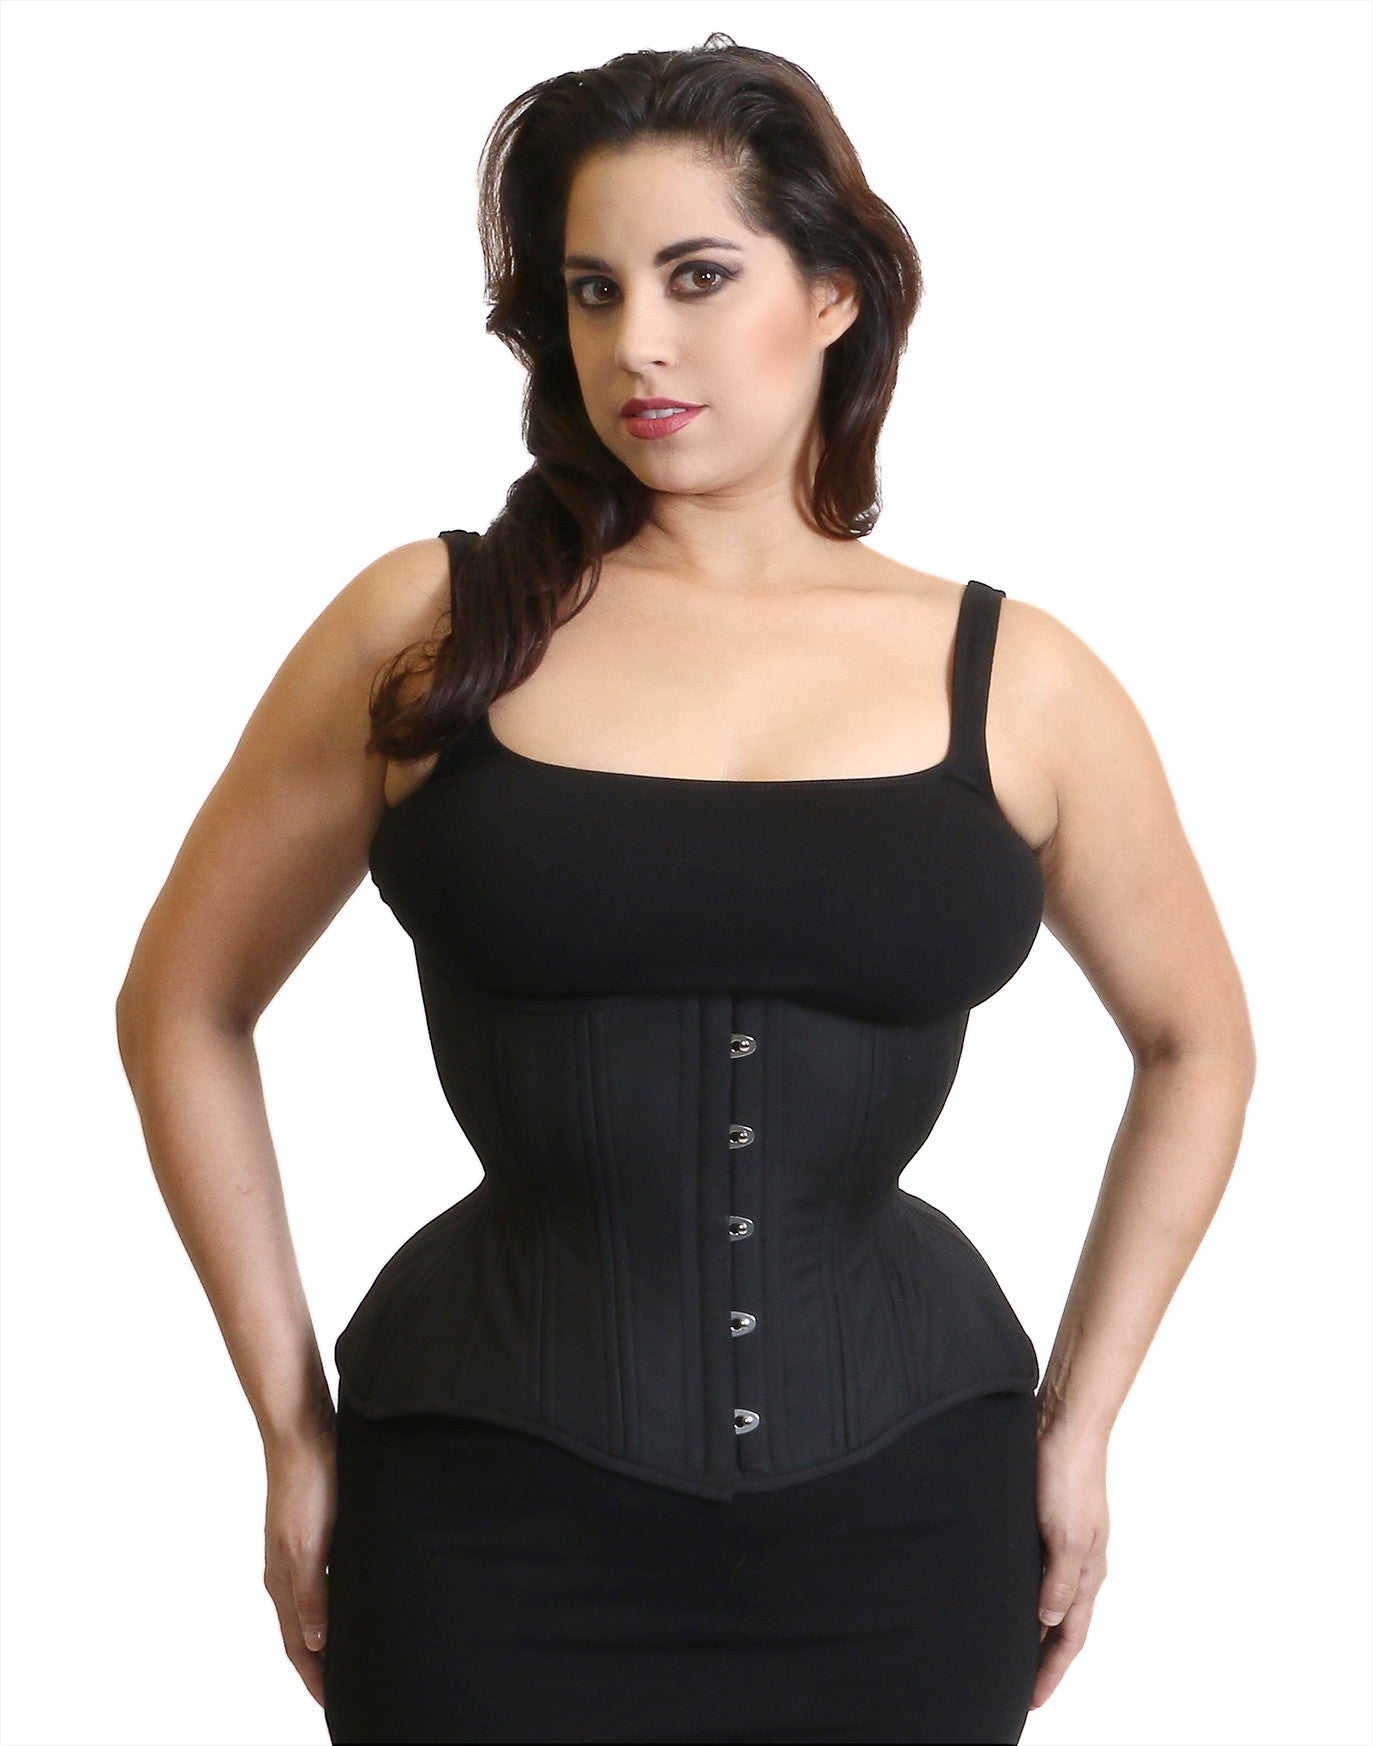 Timeless Trends Corsets - @miaezlay with her cool outfit